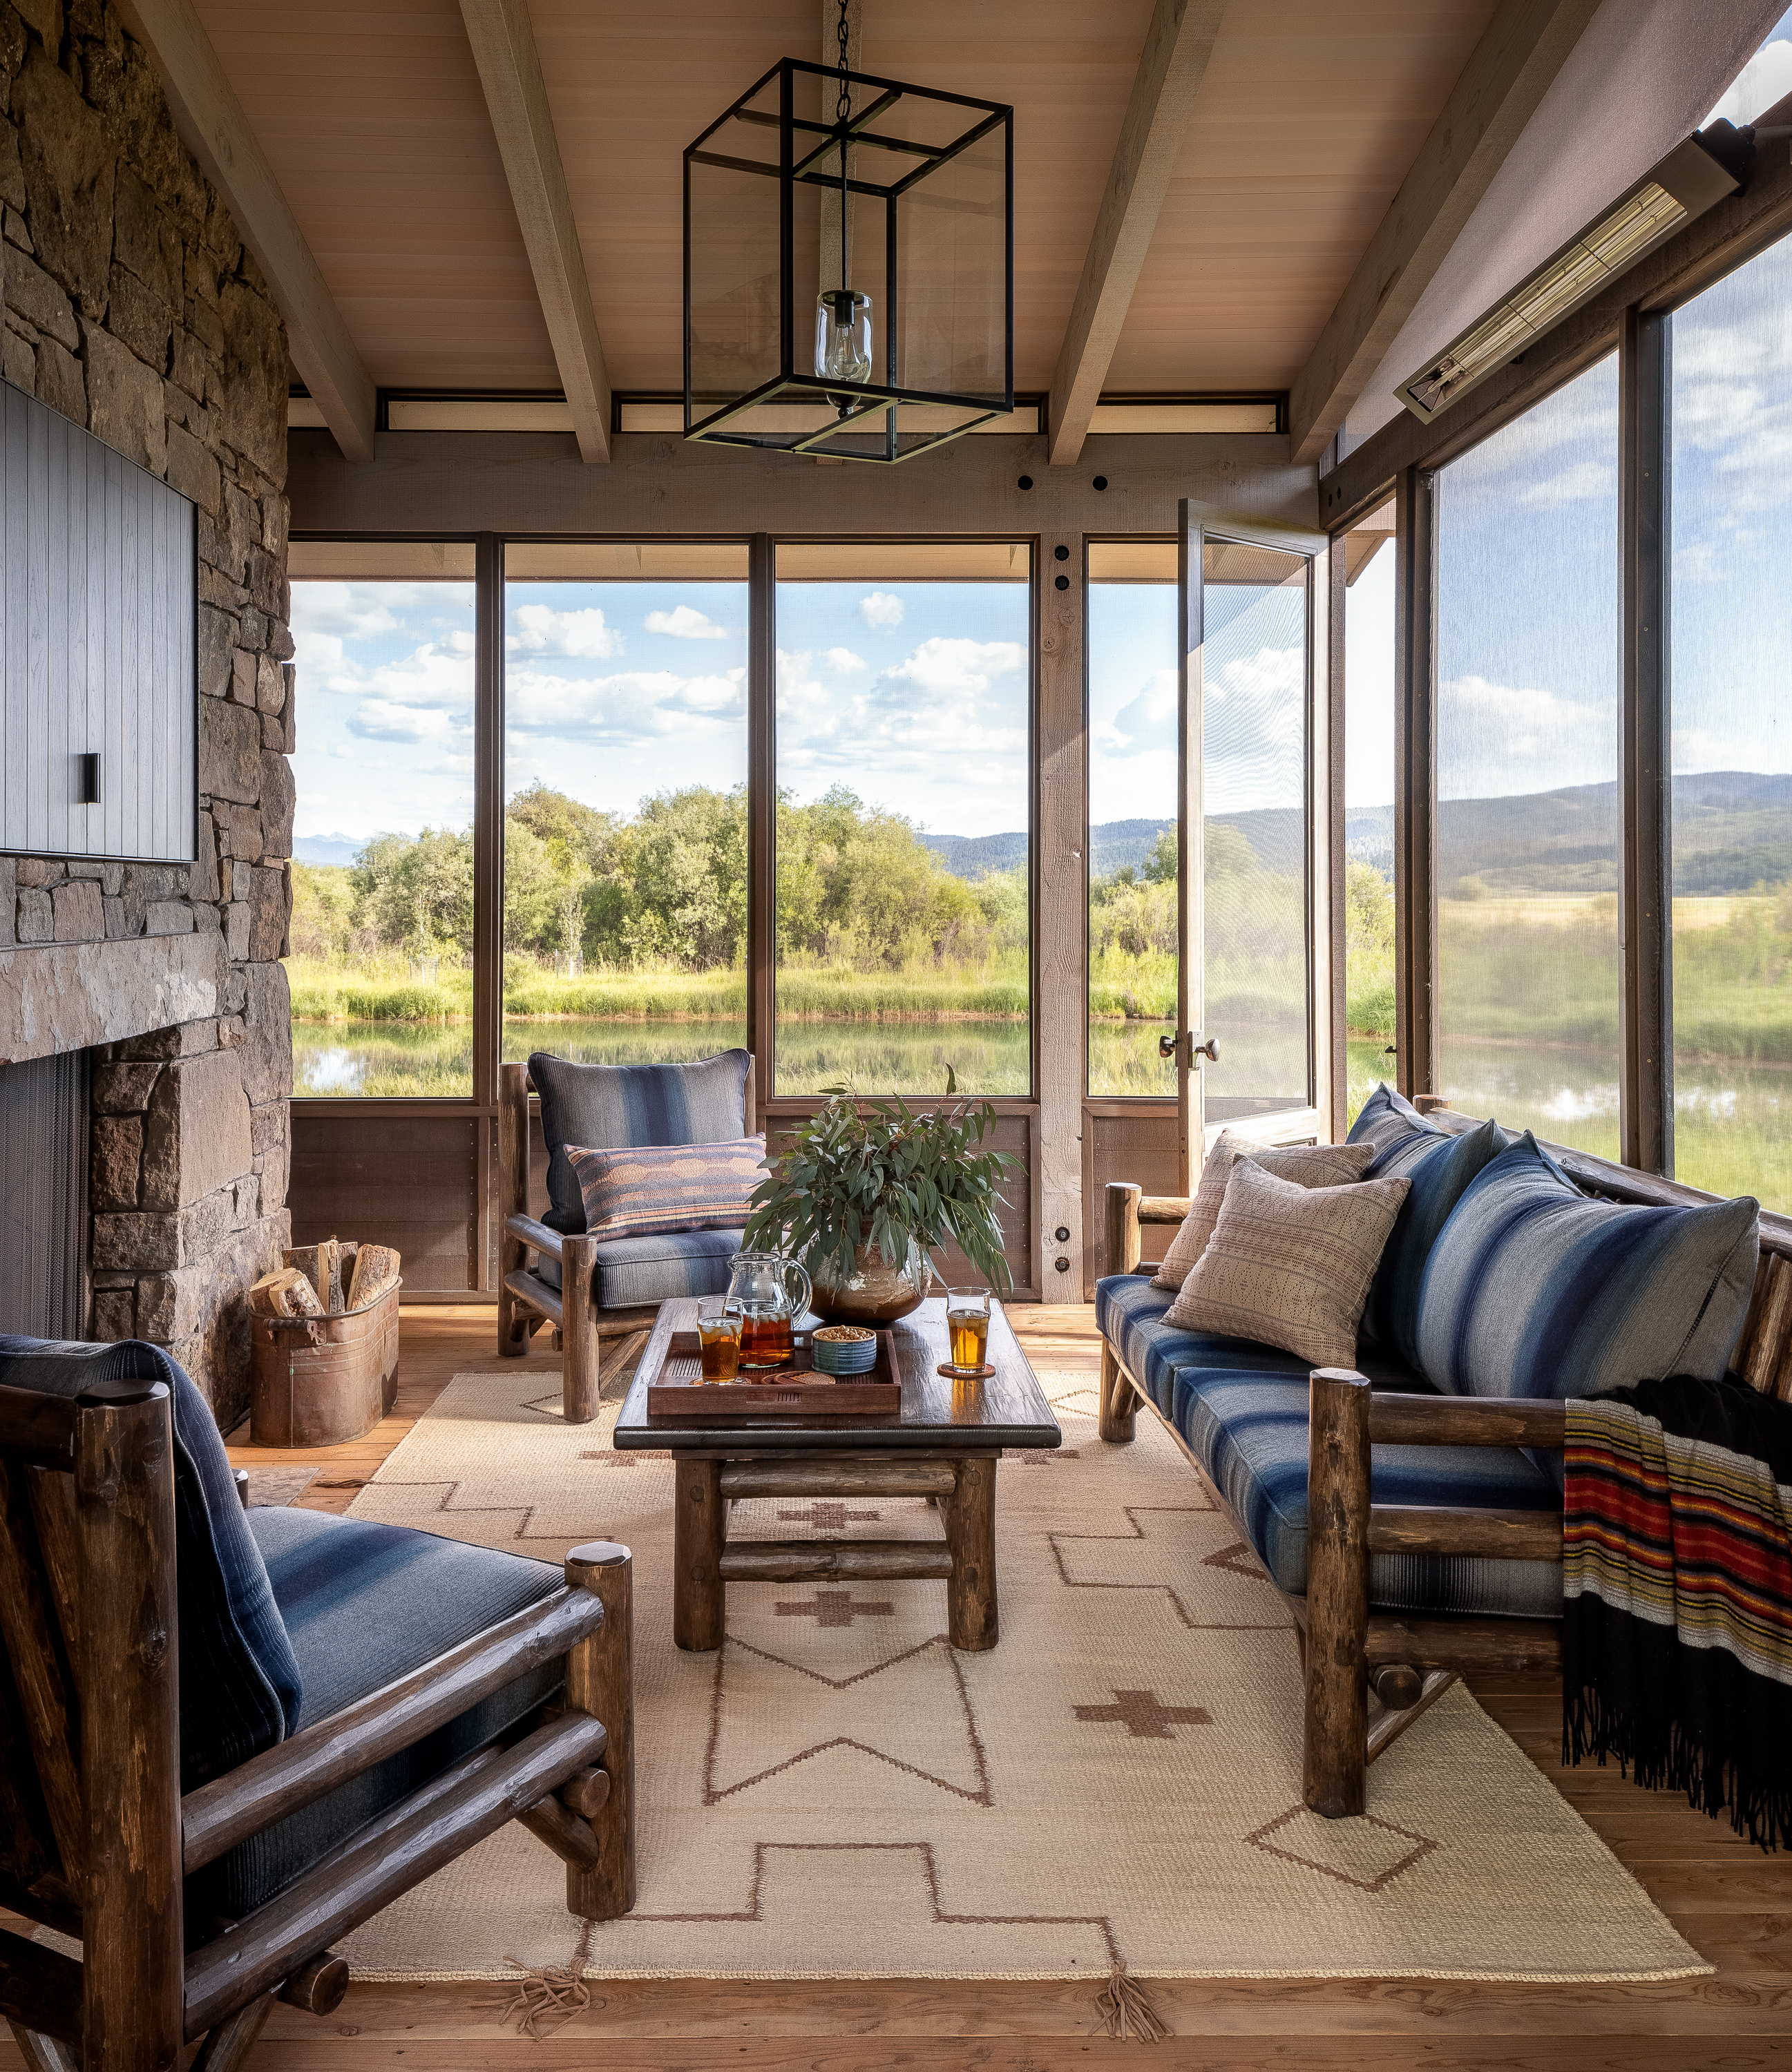 A sunlit log cabin-style sunroom with glass walls on three sides, showcasing exterior finishes indoors. A large fireplace shares the fourth wall, creating a cozy retreat